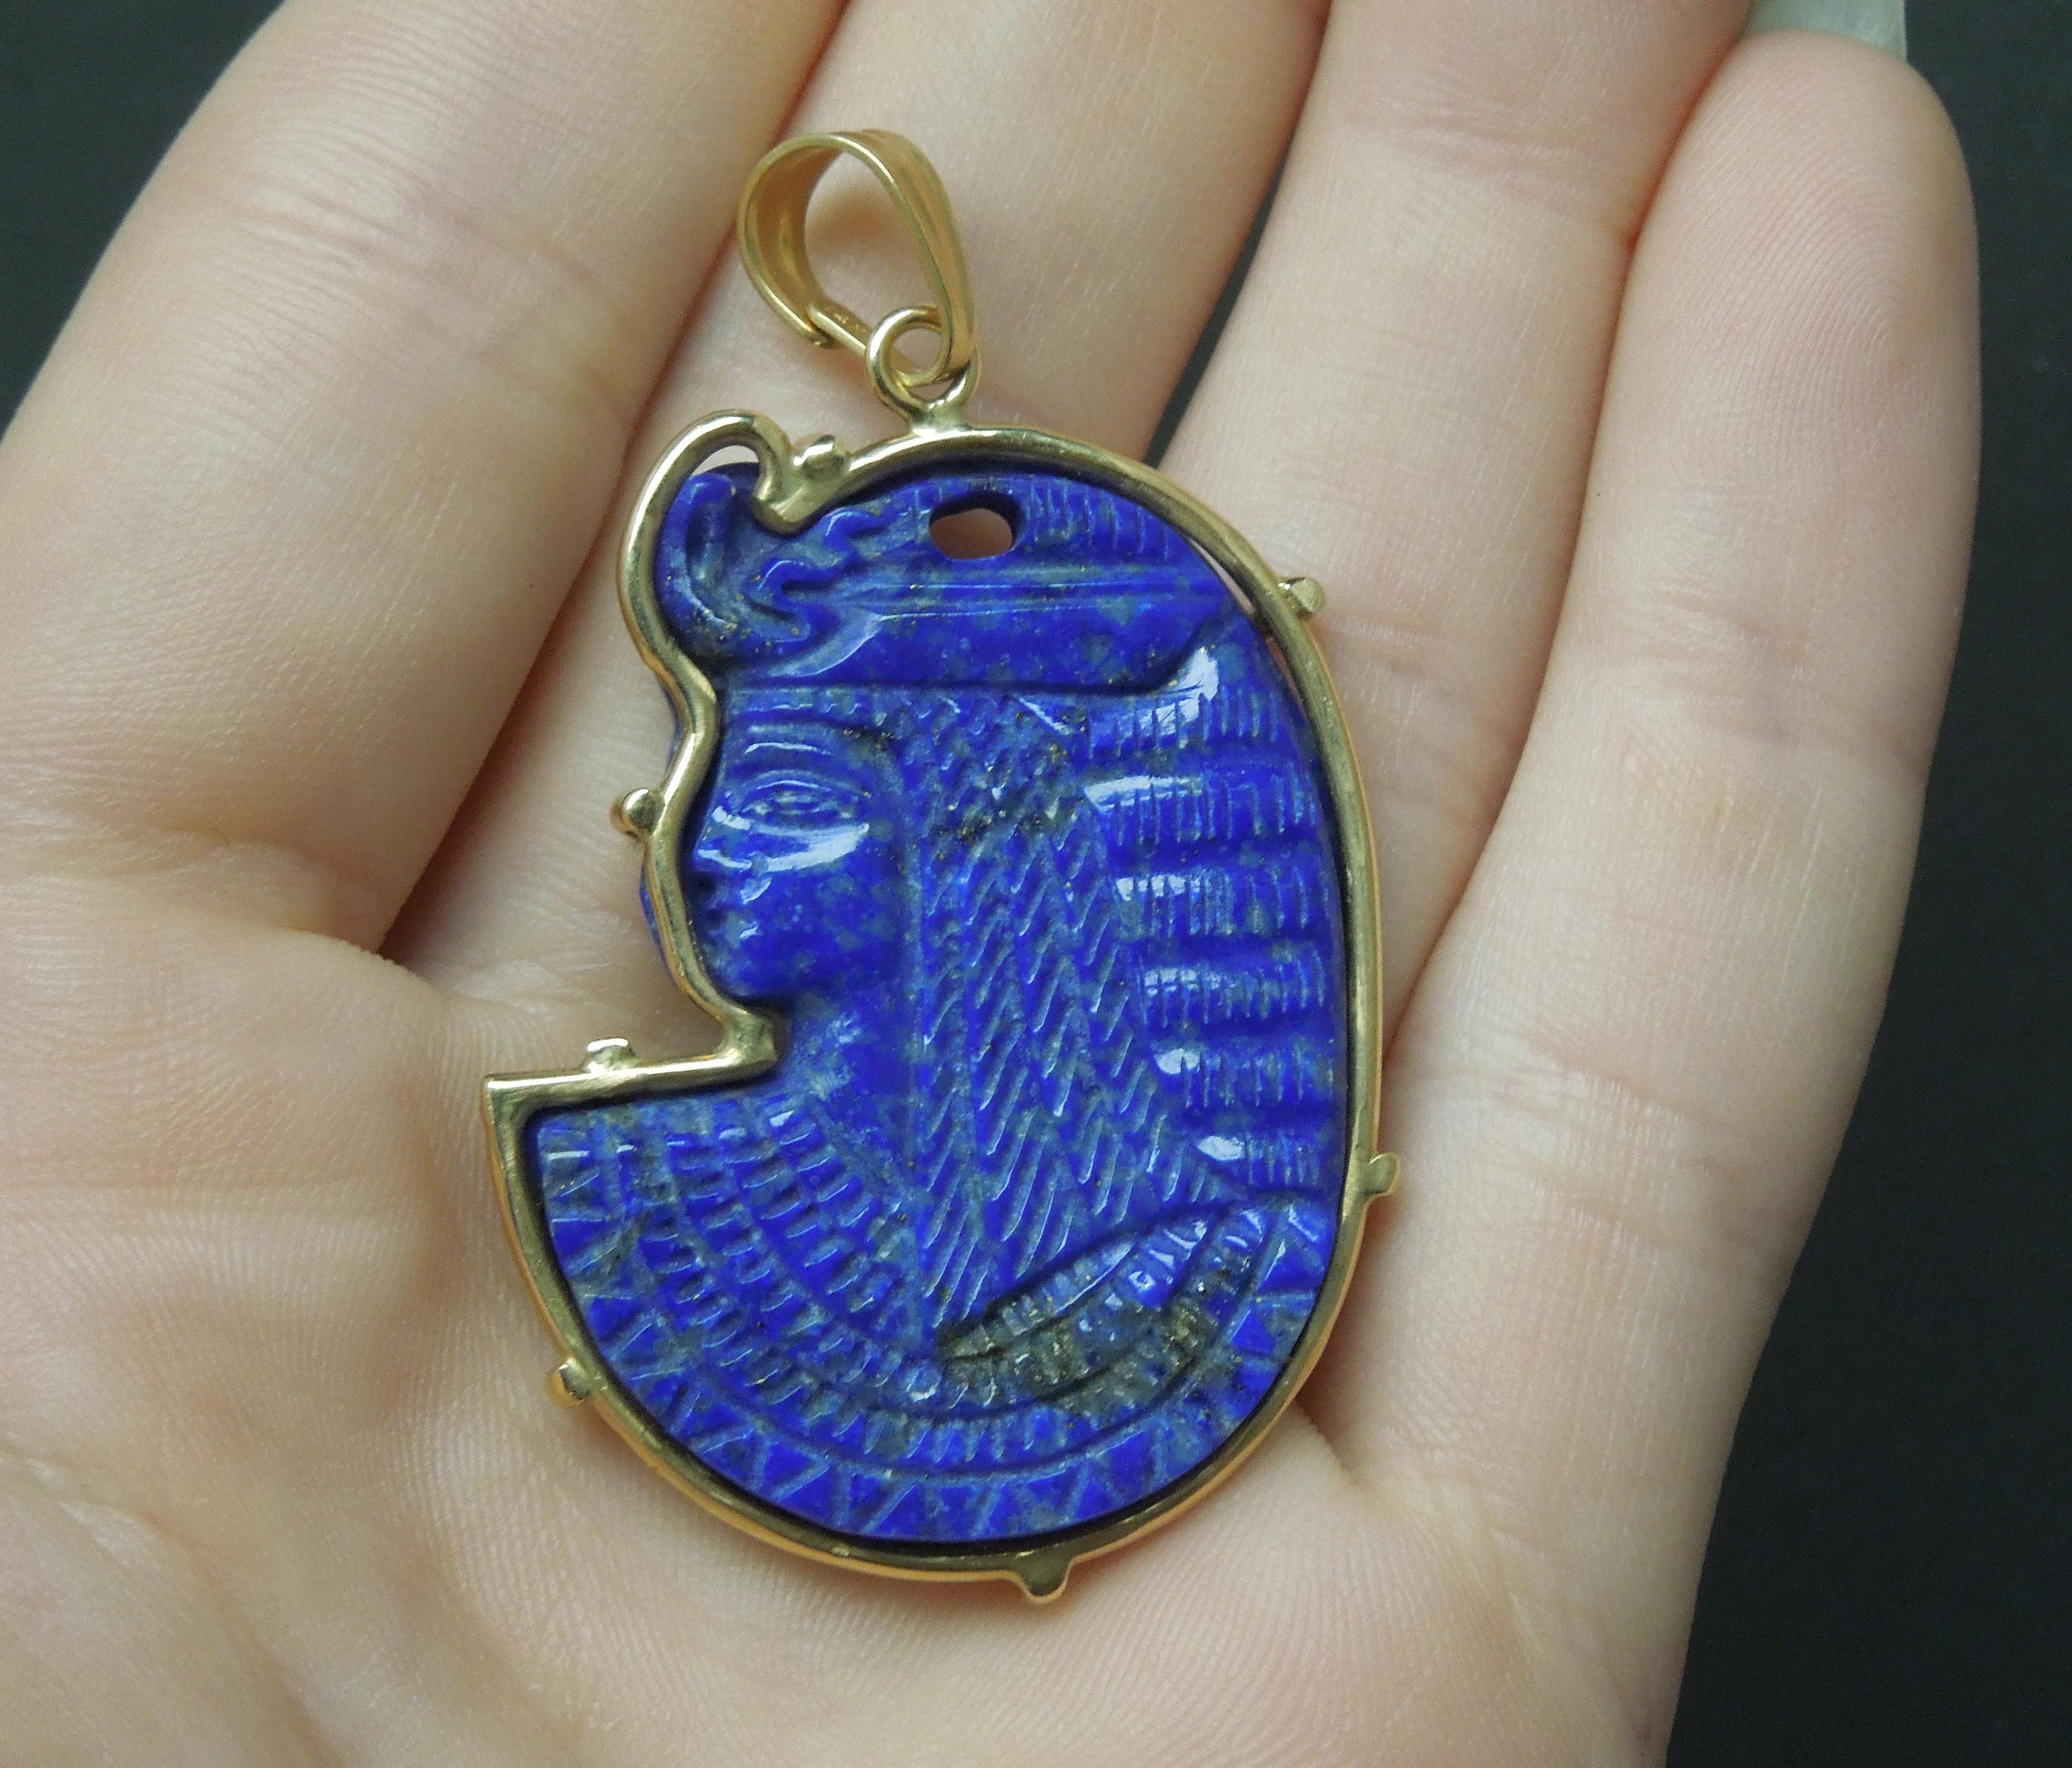 This Cleopatra Amulet Pendant features 1 Hand Carved piece of Natural Lapis Lazuli, secured in a Hand Fabricated 7-Prong frame setting. *Both Frame & Bale electronically tested for metal purity, constructed completely of 14 Karat Yellow Gold. The